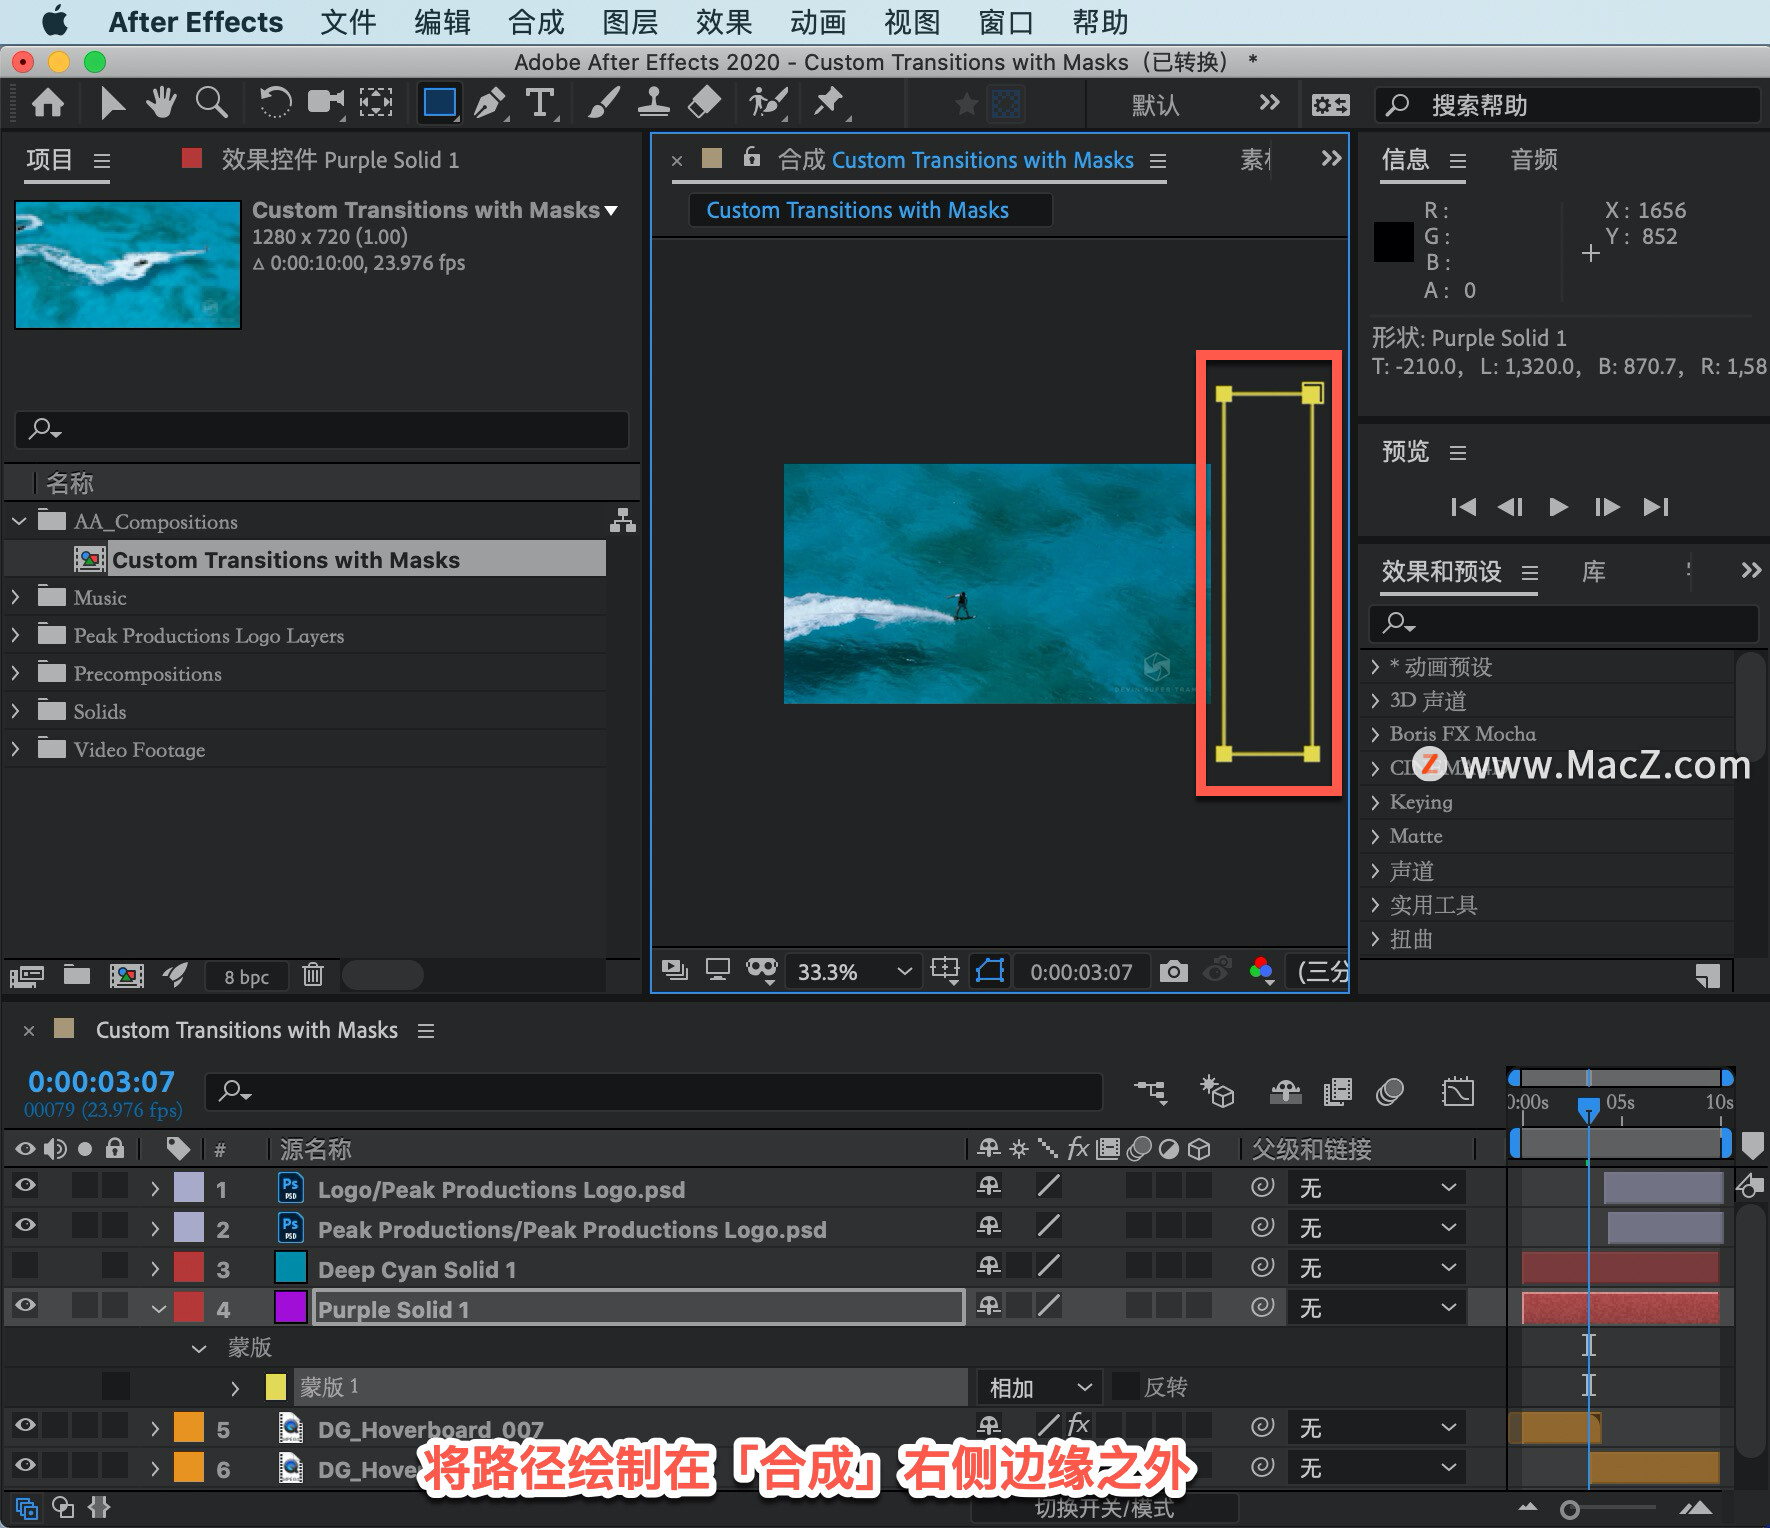 After Effects 教程「25」，如何在 After Effects 中对蒙版进行动画绘制？